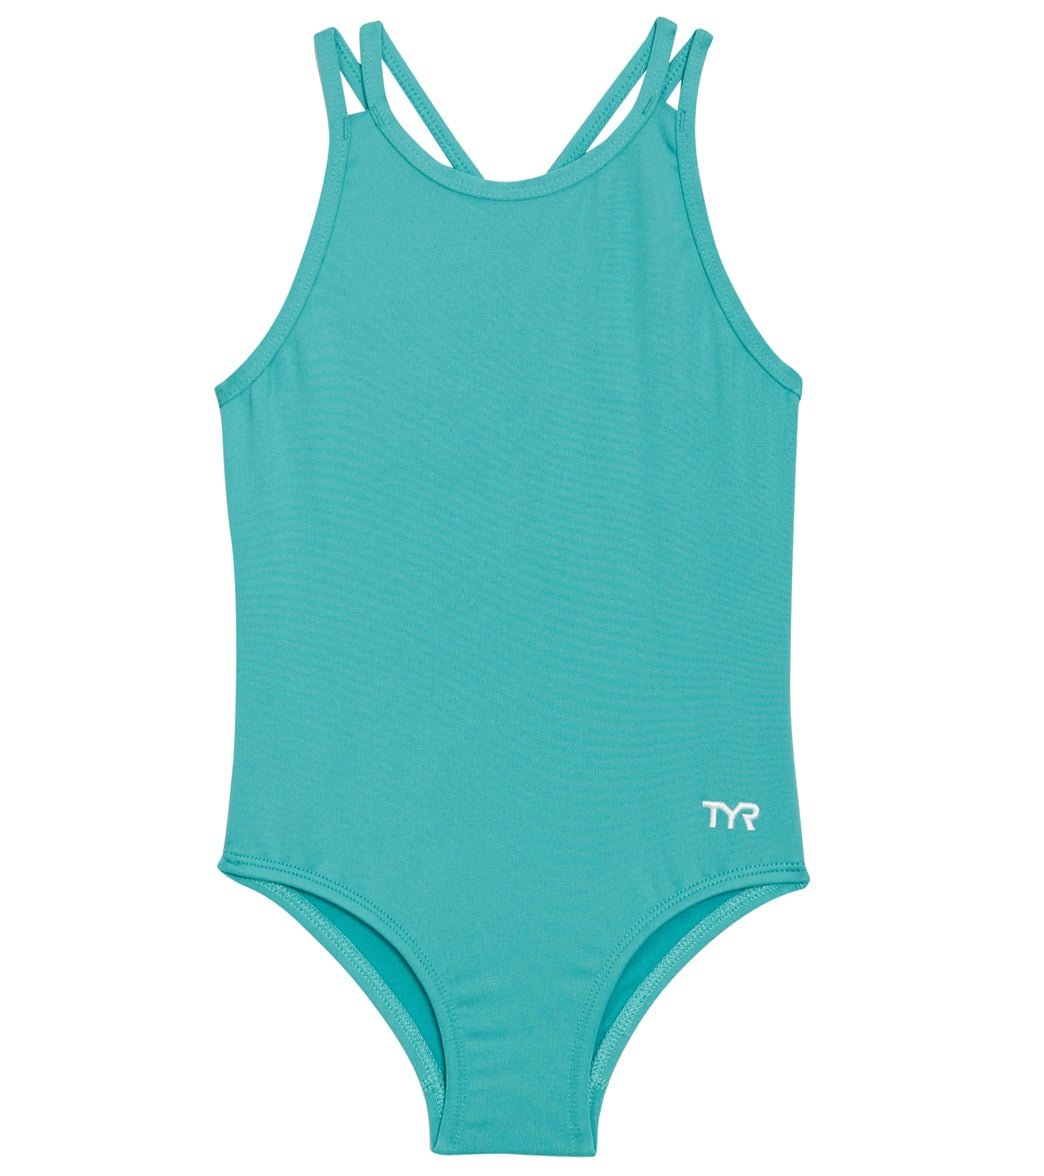 TYR Girls Solid Olivia Fit One Piece Swimsuit (Little Kid, Big Kid)